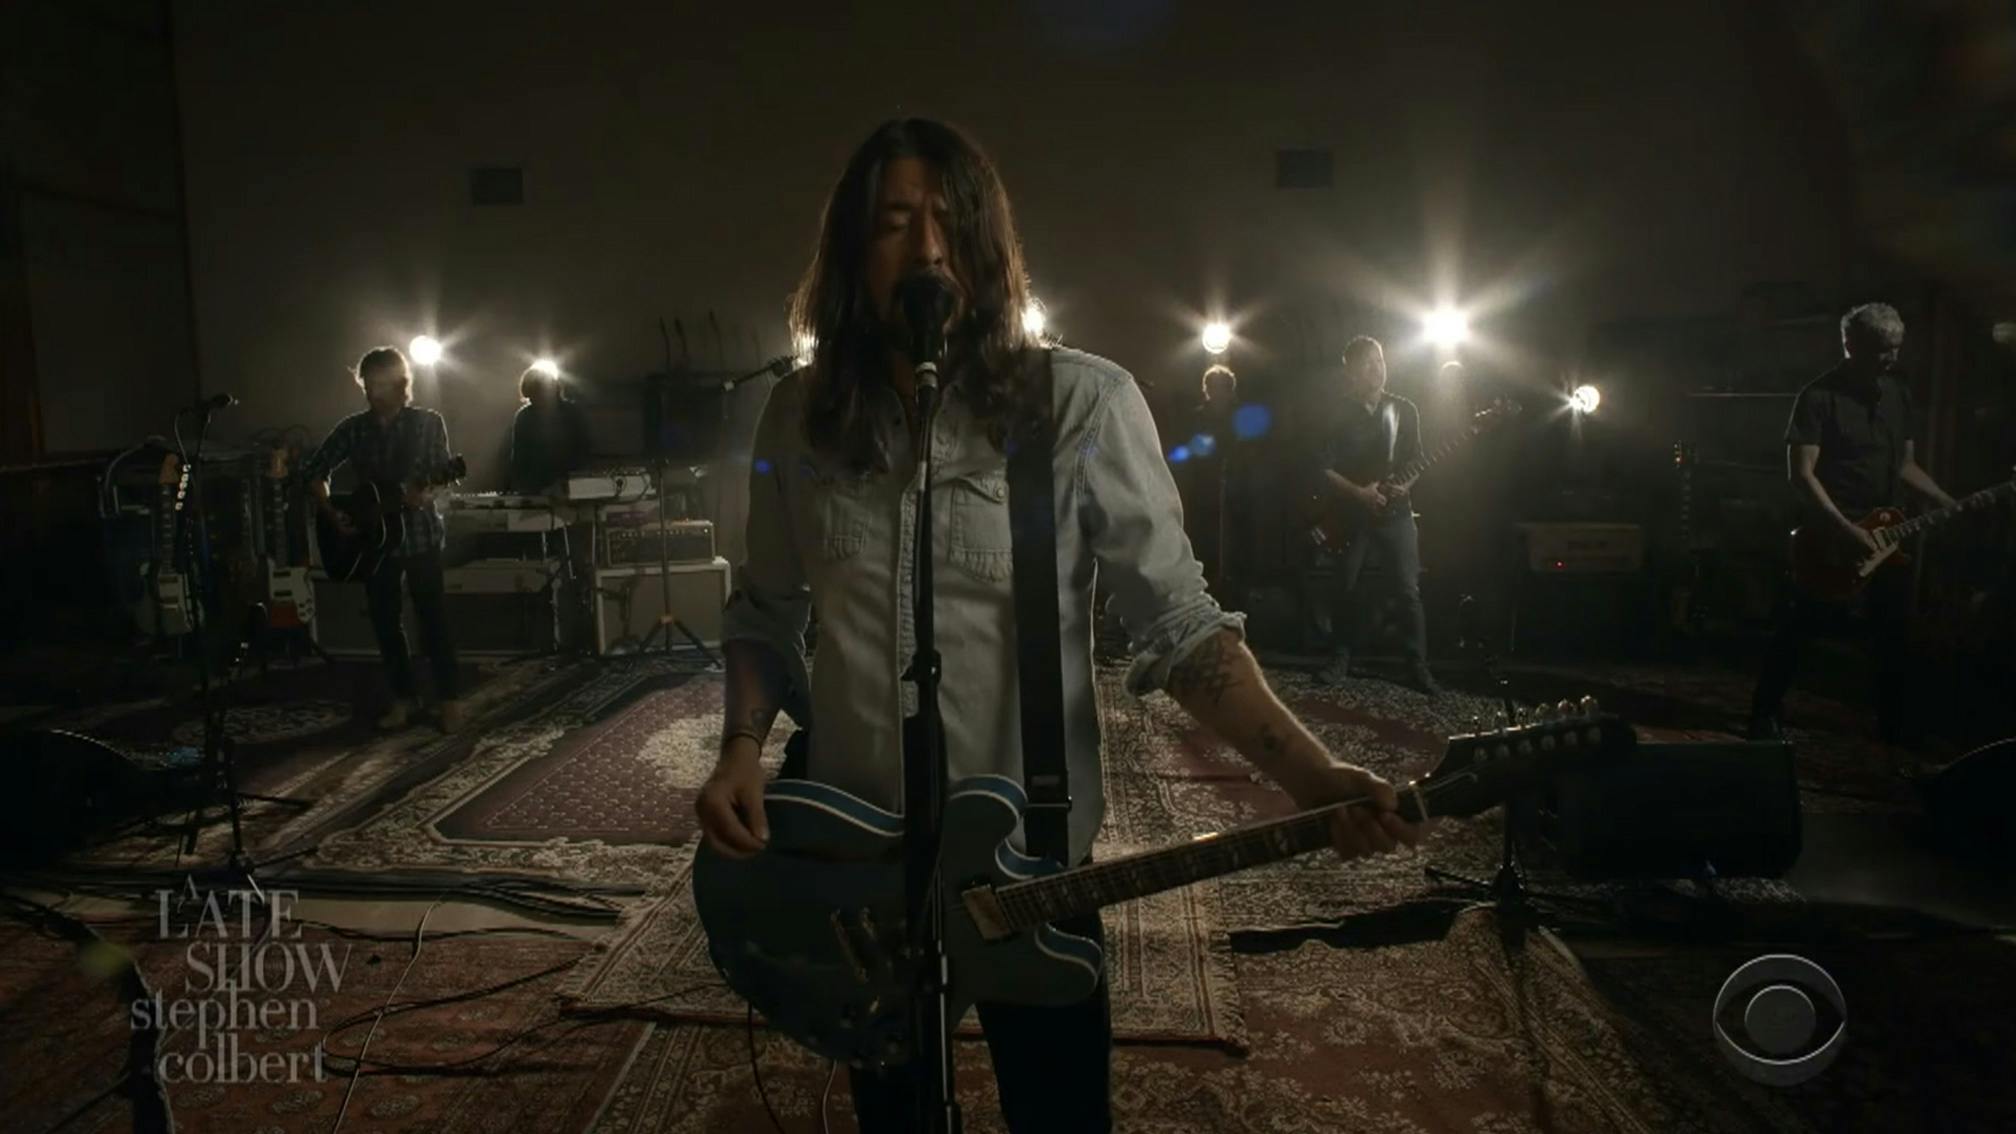 Watch Foo Fighters Perform New Single Shame Shame On The Late Show With Stephen Colbert